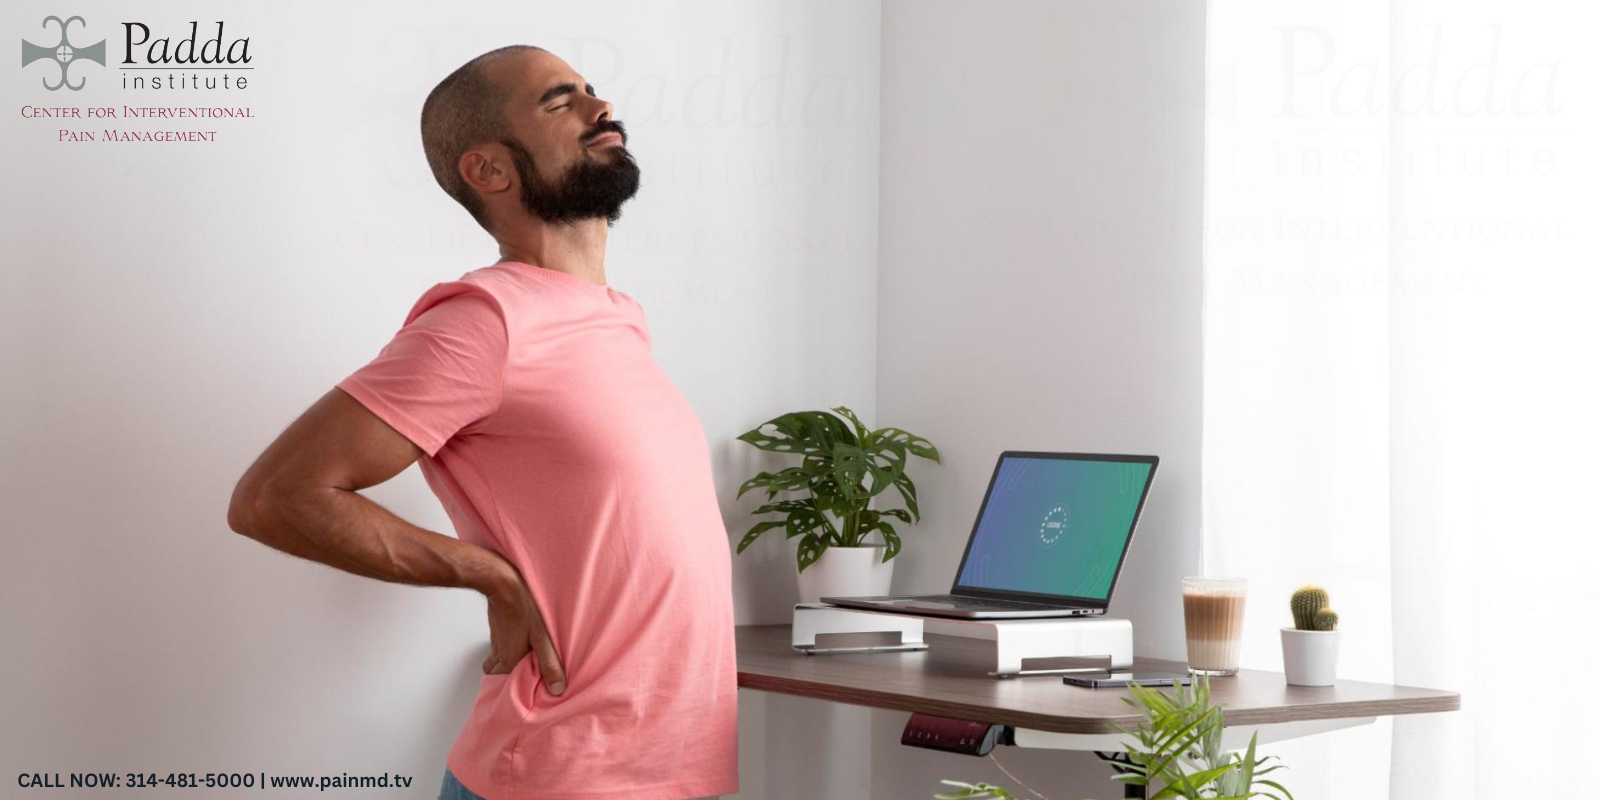 Get Chronic Low Back Pain Treatment From Padda Institute